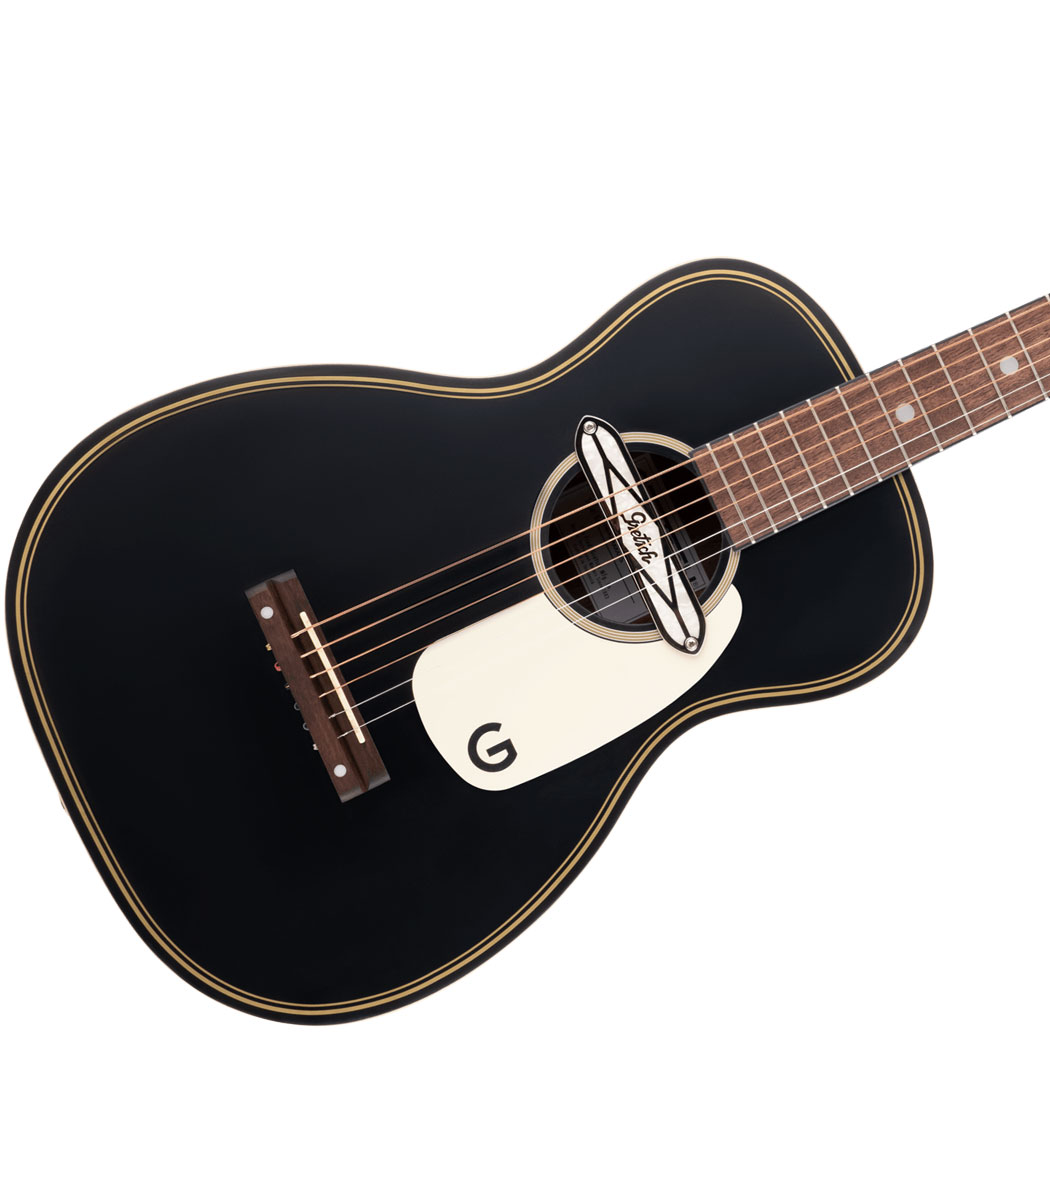 Gretsch G9520e Gin Rickey Acoustic Electric With Soundhole,Easy Fried Chicken Recipe Without Buttermilk